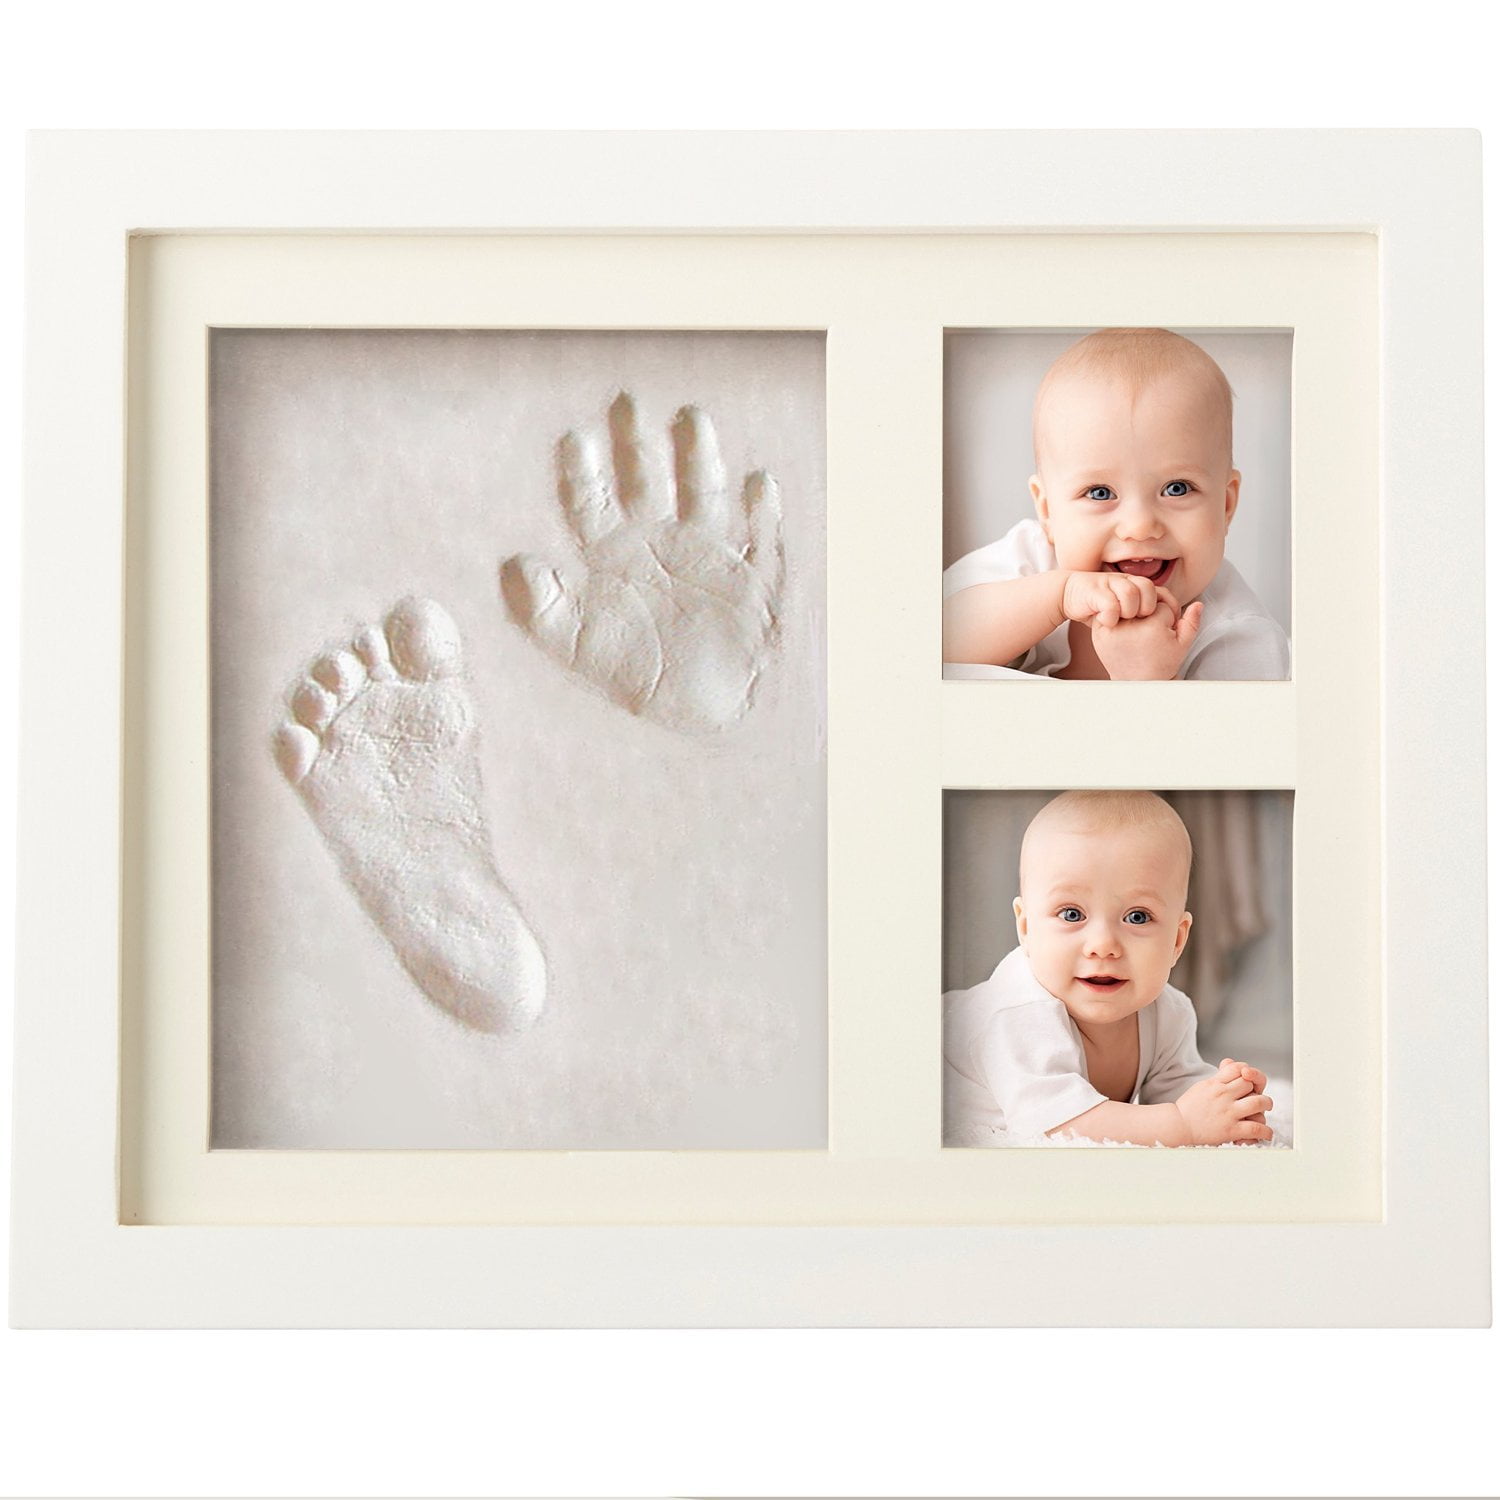 Baby Nursery Decor Accessory Baby Handprint and Footprint Kit Wooden Baby Keepsake Frame Wall PhotoFrame and Commemorate Kit 